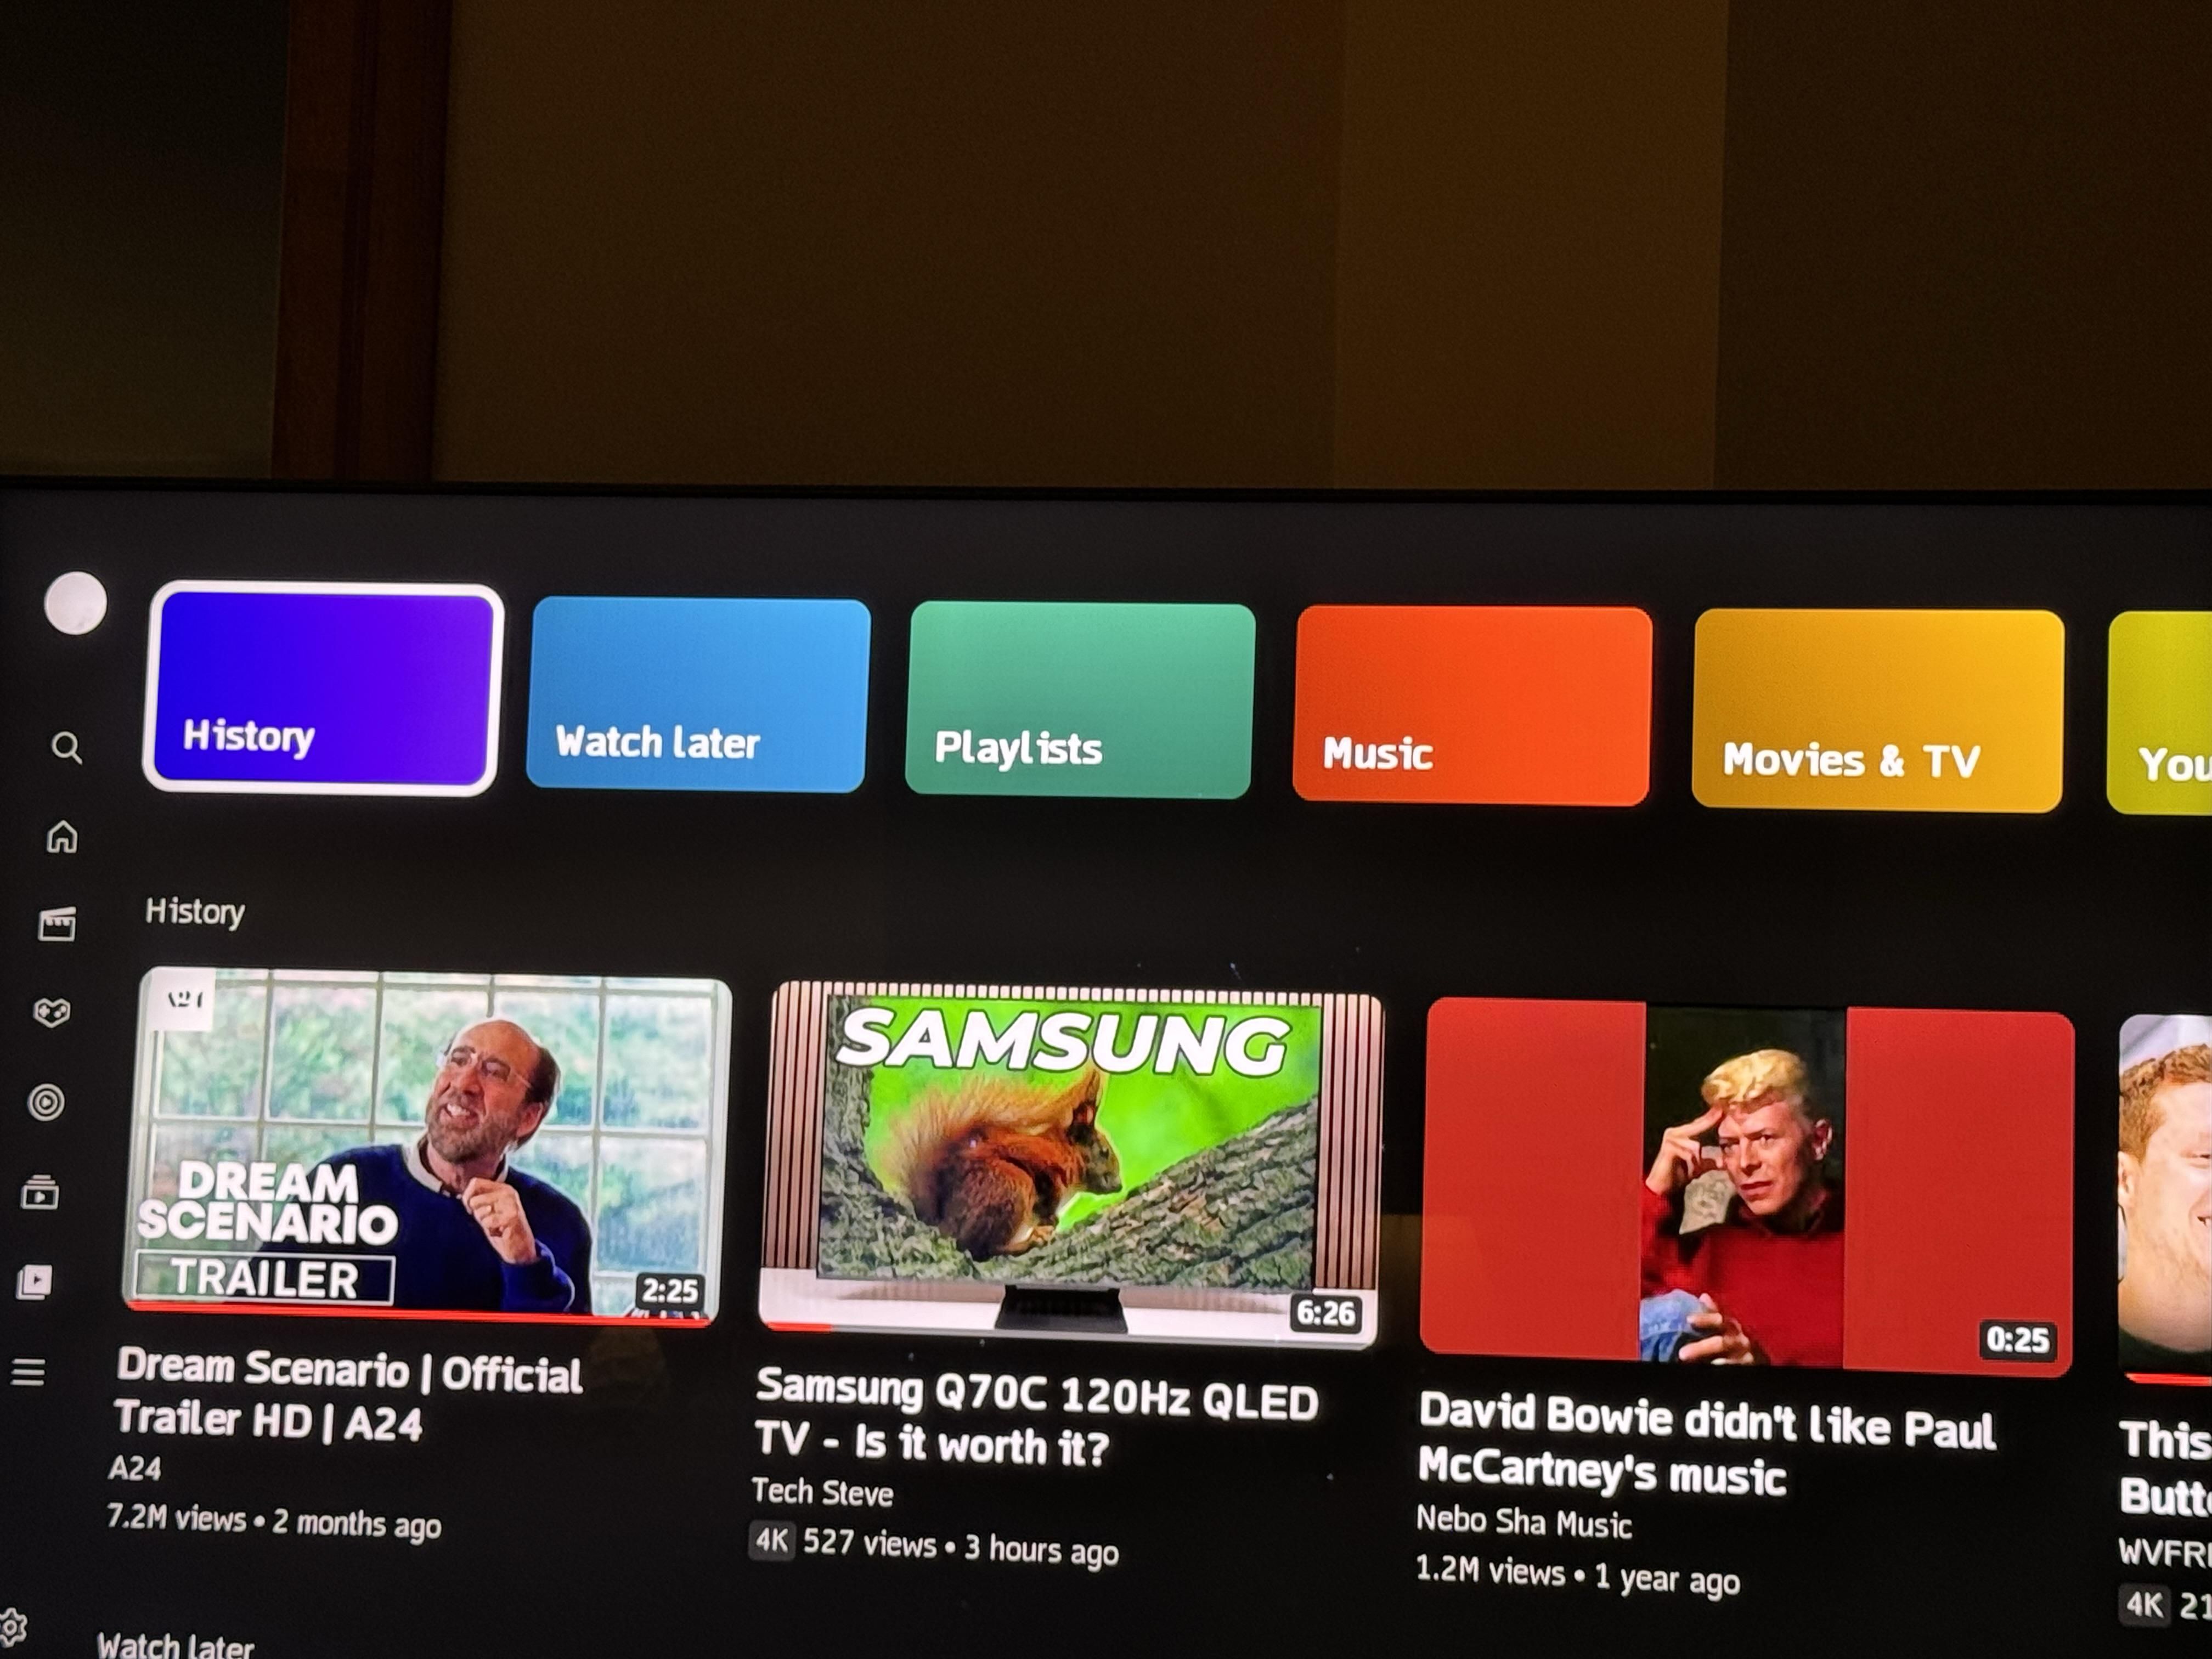 YouTube app interface change loses functionality - Roku Community